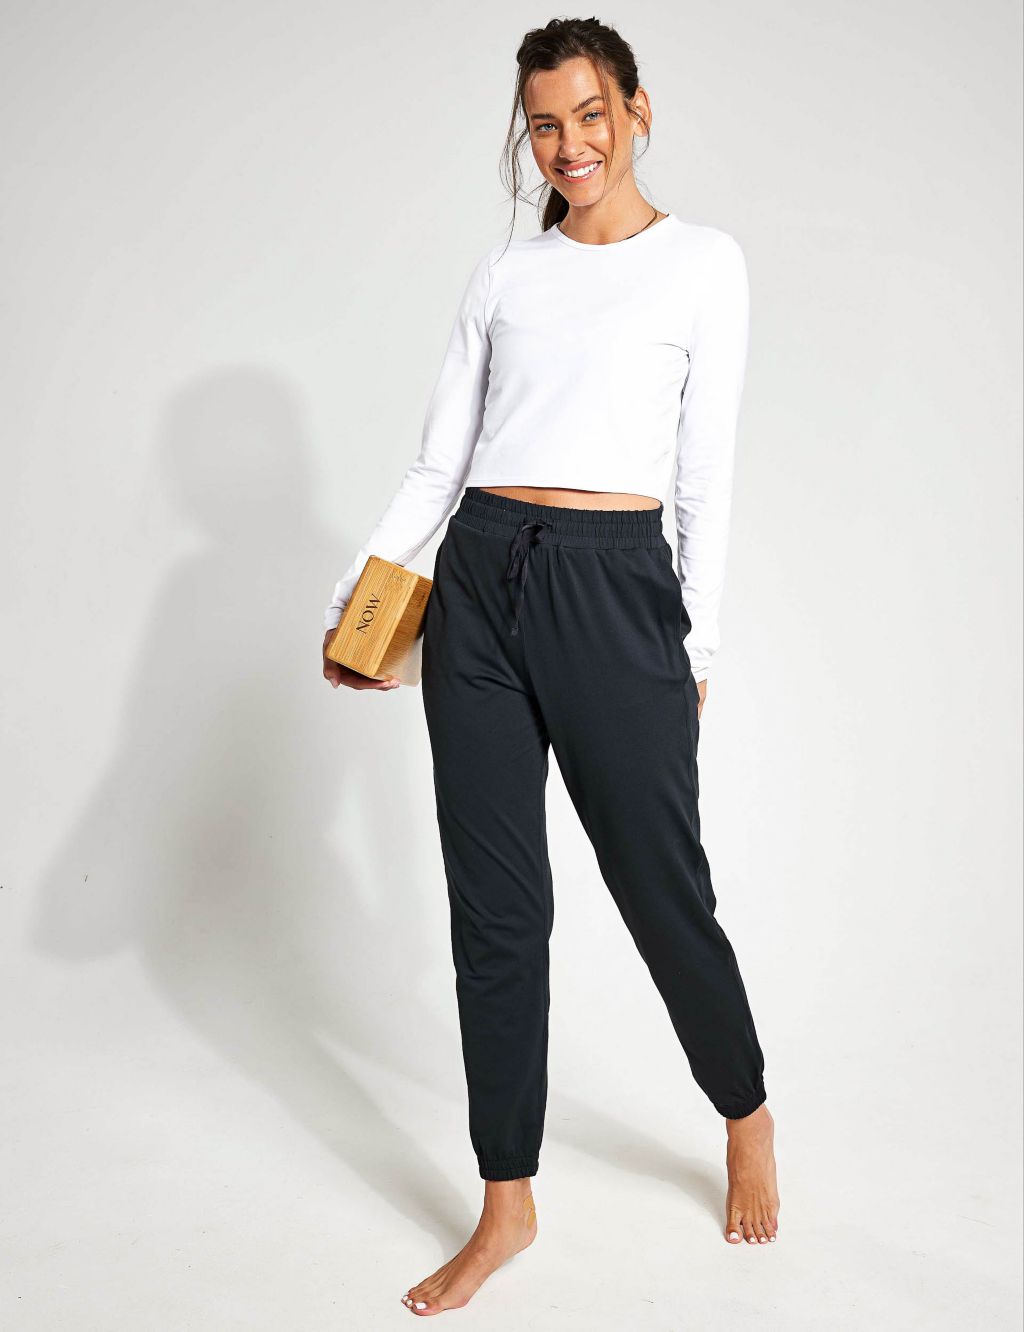 Reset Cuffed Joggers | Girlfriend Collective | M&S